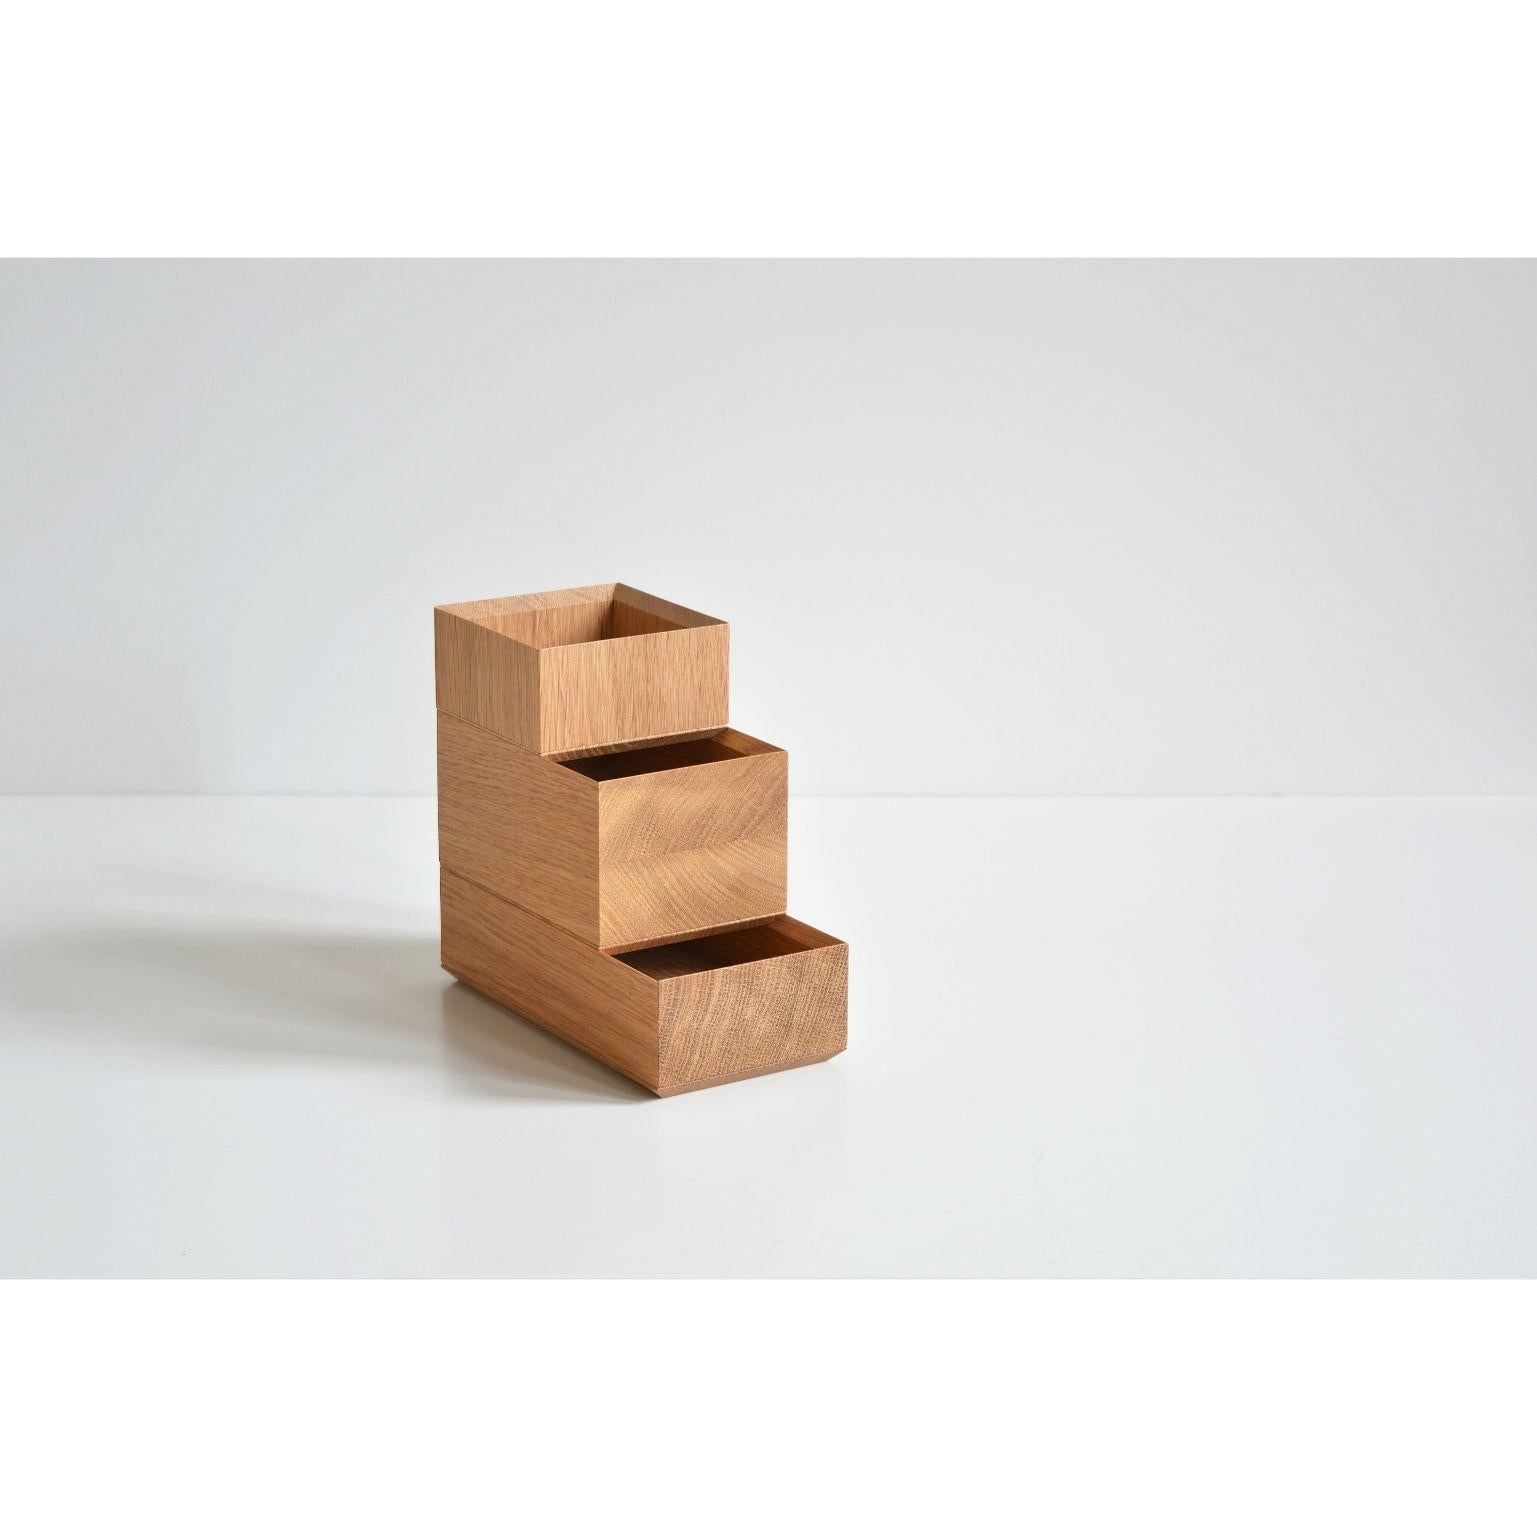 Set of 3 pino boxes by Antrei Hartikainen
Materials: Oak, natural oil wax
Dimensions: D 9, W 9, H 5 / 9,5 / 14cm

A set of three vertical and two horizontal stacking boxes constructed of vividly grained woods. The pino boxes may be arranged in